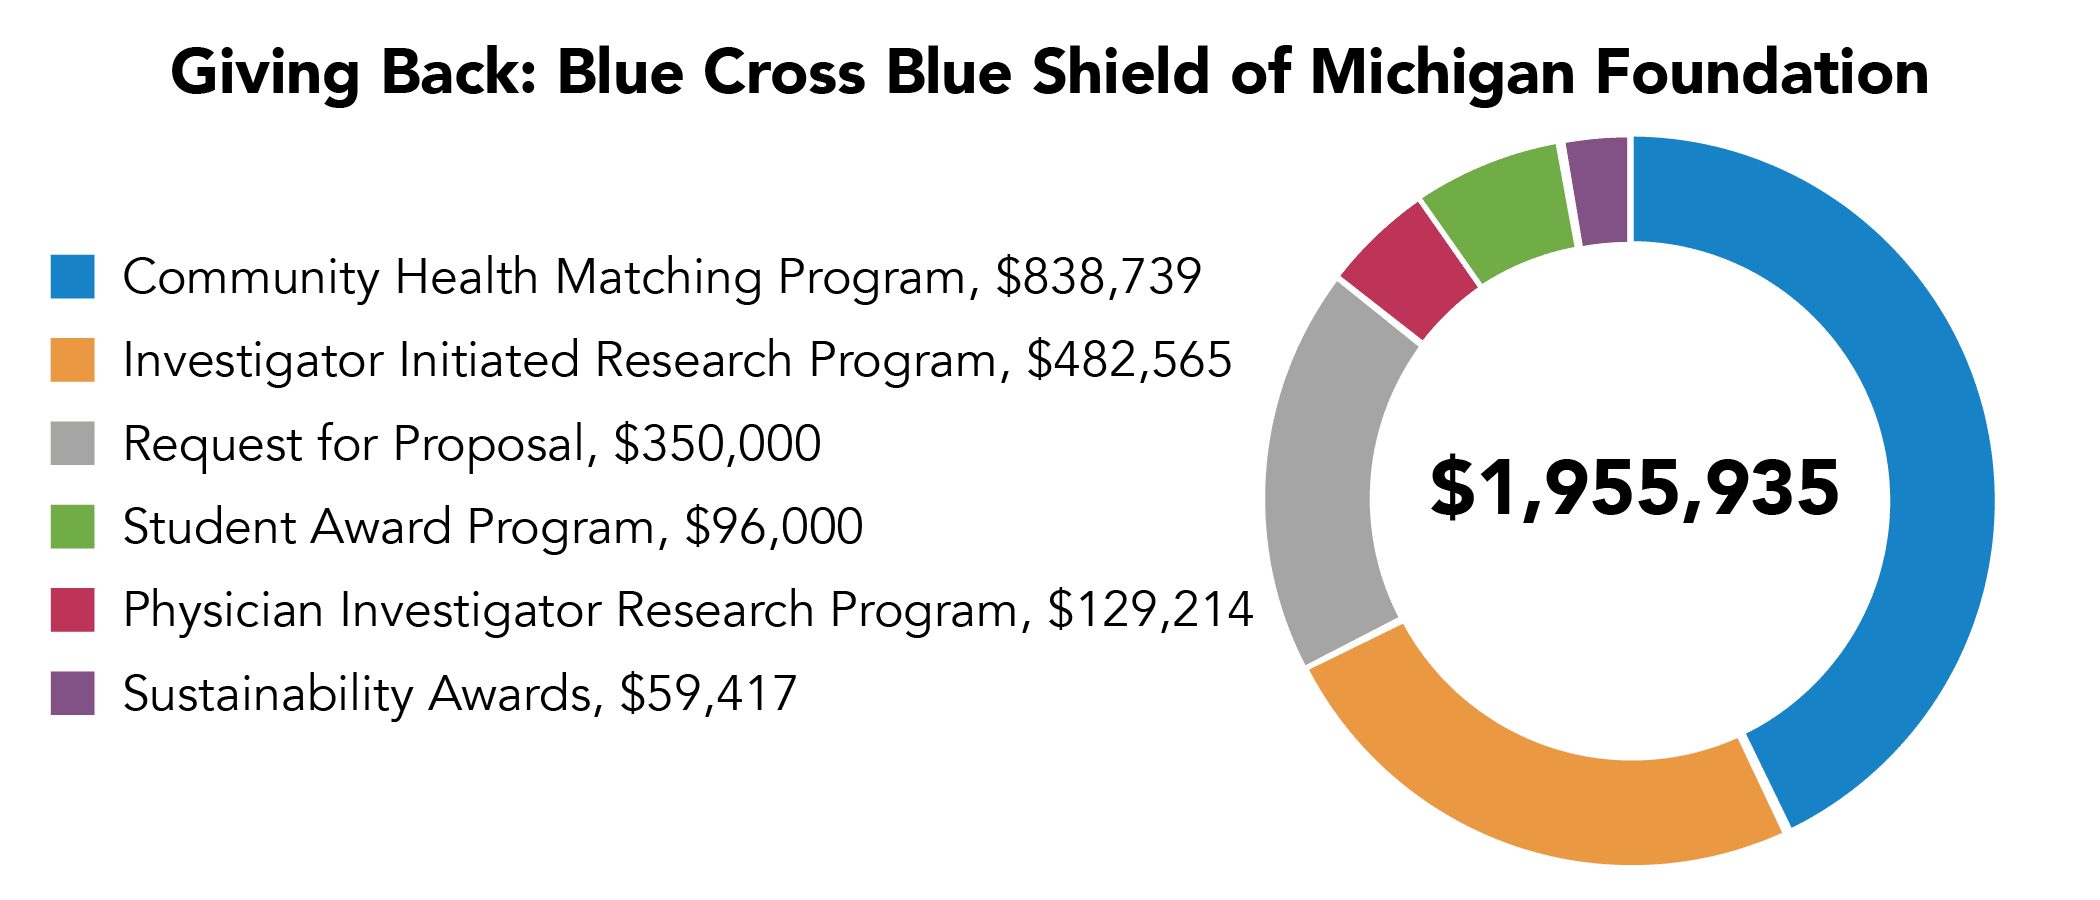 Table - title reads Blue Cross Blue Shield of Michigan Foundation: Giving Back; copy: • Total research and program community program grants in 2019: $1,955,935 o Community Health Matching Grant Program: $838,739 o Investigator Initiated Research Program: $482,565 o Request for Proposal: $350,000 o Student Award Program: $96,000 o Physician Investigator Research Award Program: $129,214 o Sustainability Awards $59,417